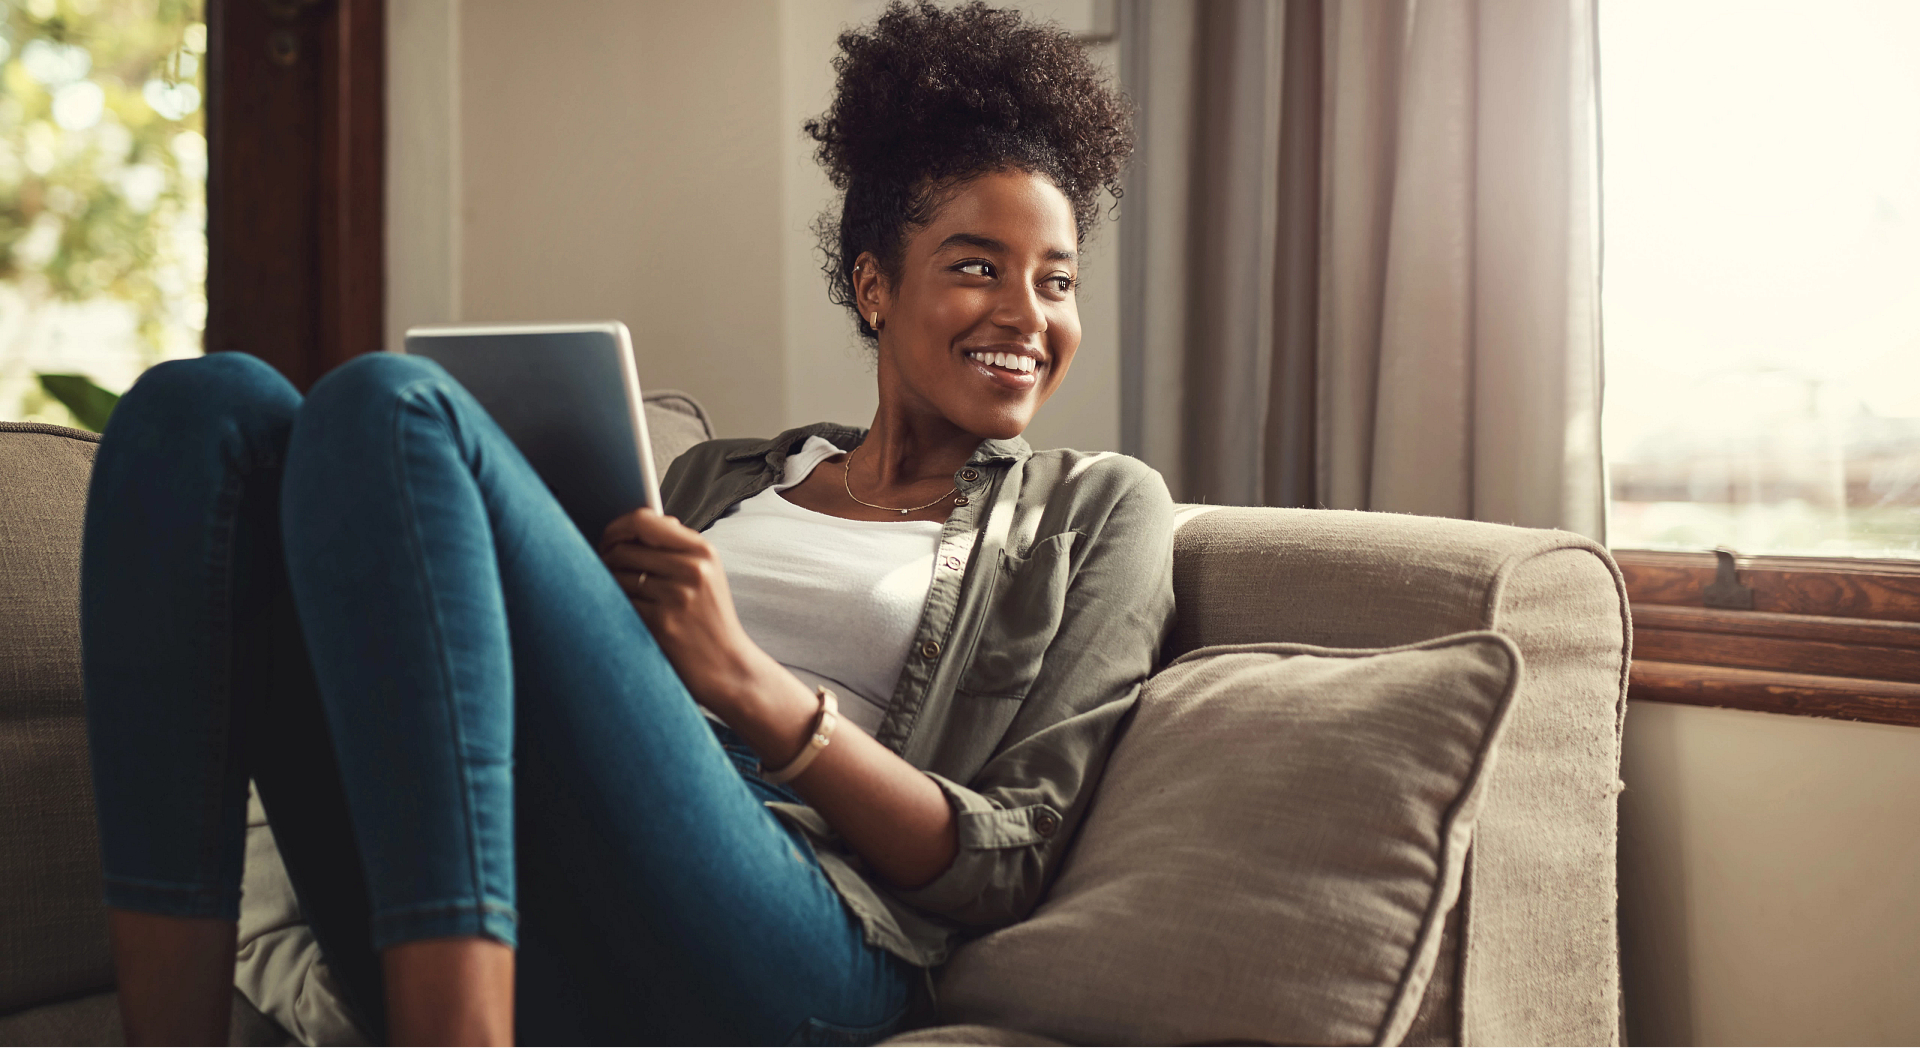 A smiling woman sitting on the couch holding a tablet device.